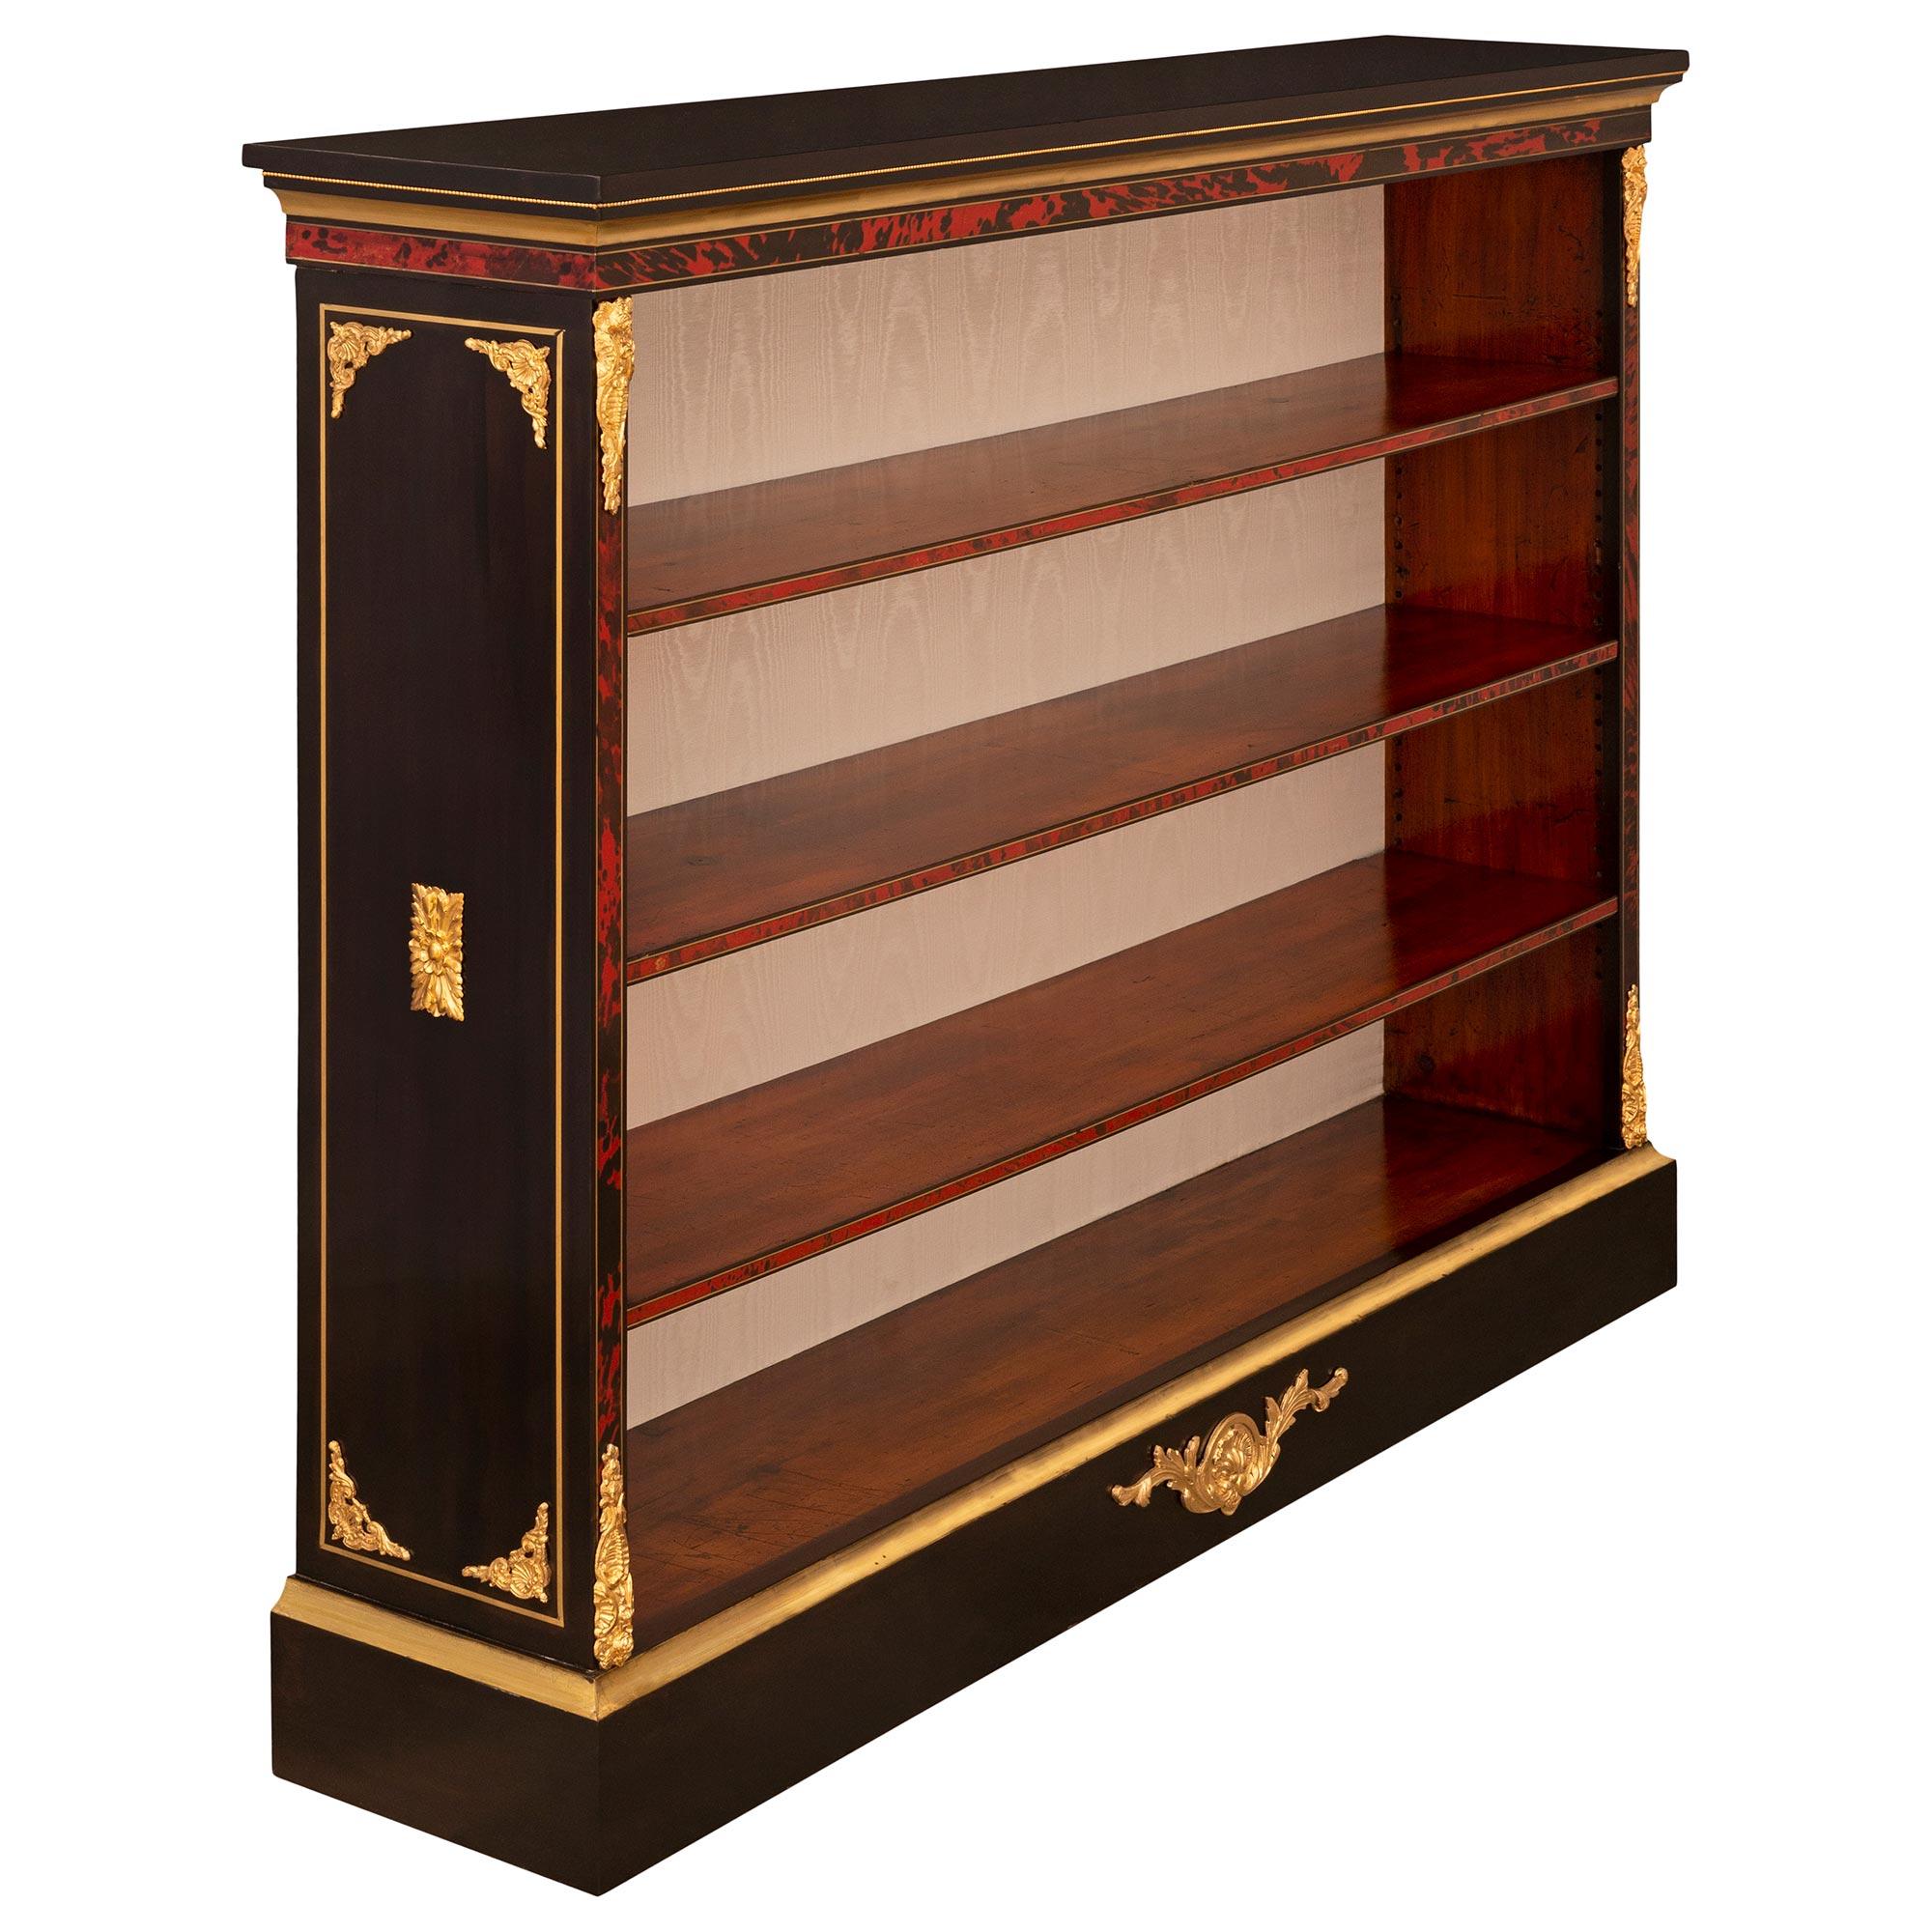 French 19th Century Napoleon III Period Ebony & Tortoiseshell Étagère Bookcase In Good Condition For Sale In West Palm Beach, FL